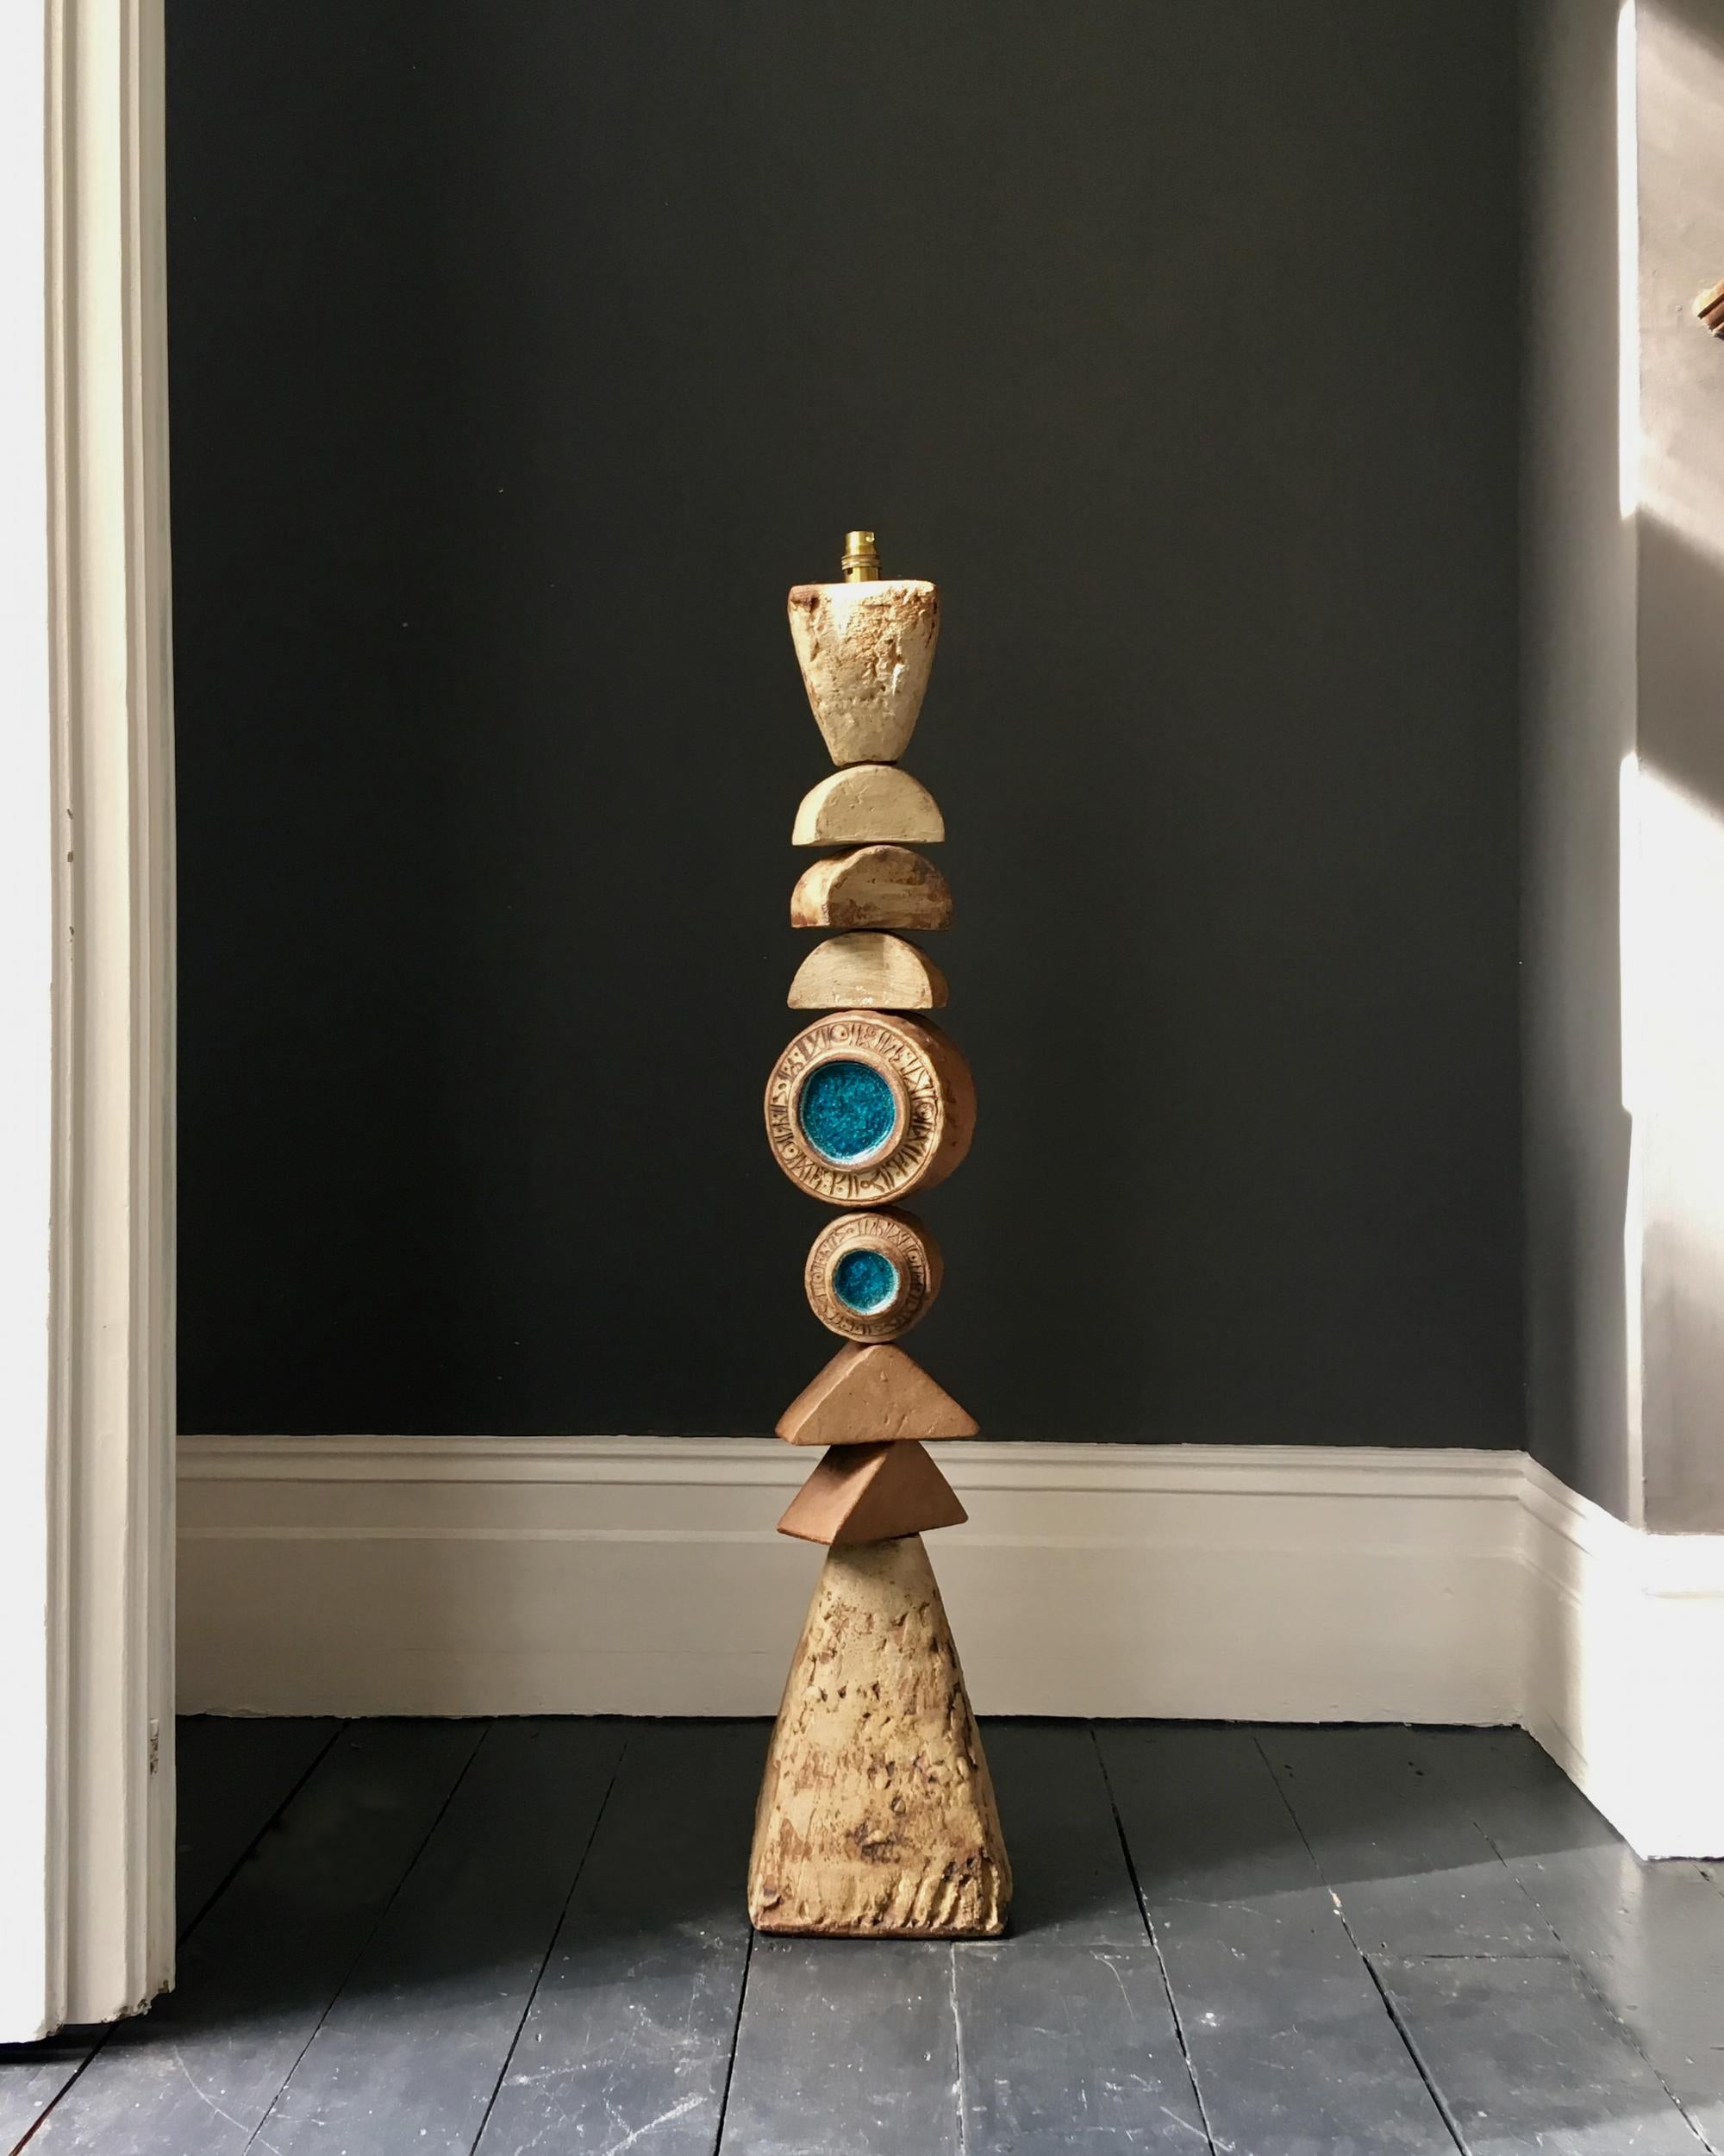 A monumental ceramic TOTEM floor lamp by Bernard Rooke, England, 1960s.

A beautiful sculptural piece, made up of ceramic elements in natural tones of terracotta and stone. The two round elements are decorated on one side with blue glass (with a